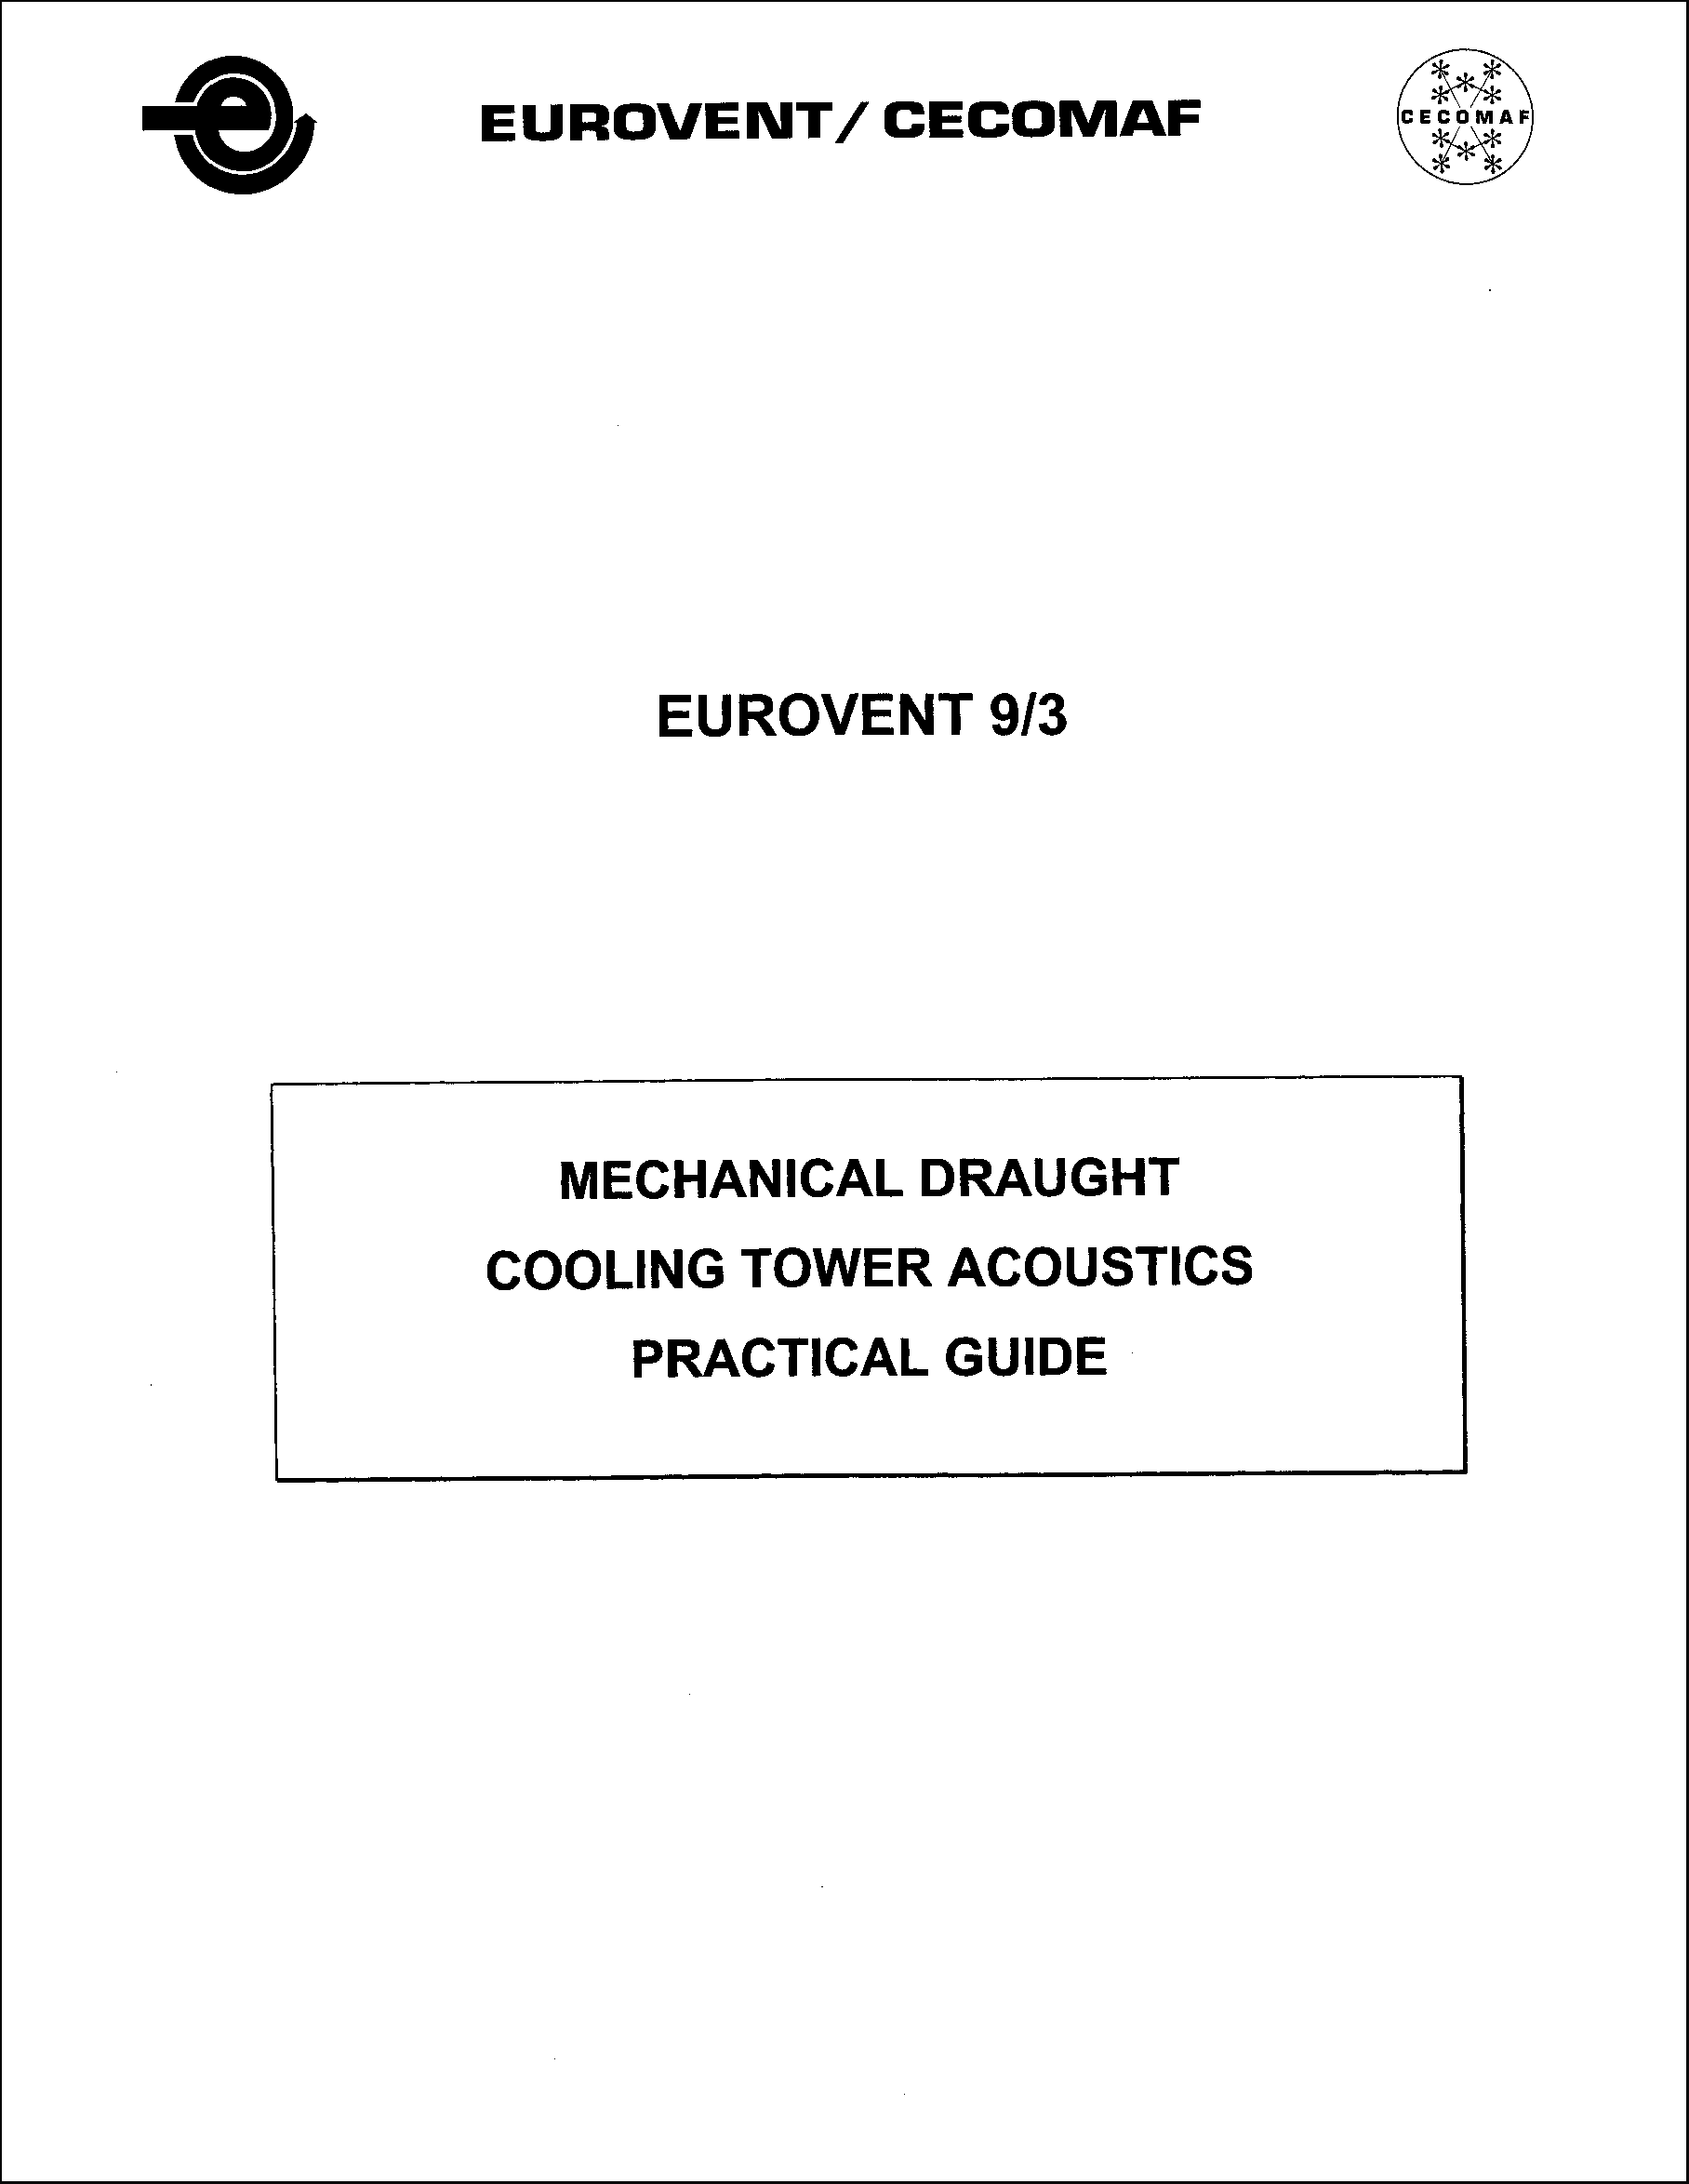 1999 - Mechanical draught cooling tower acoustics practical guide